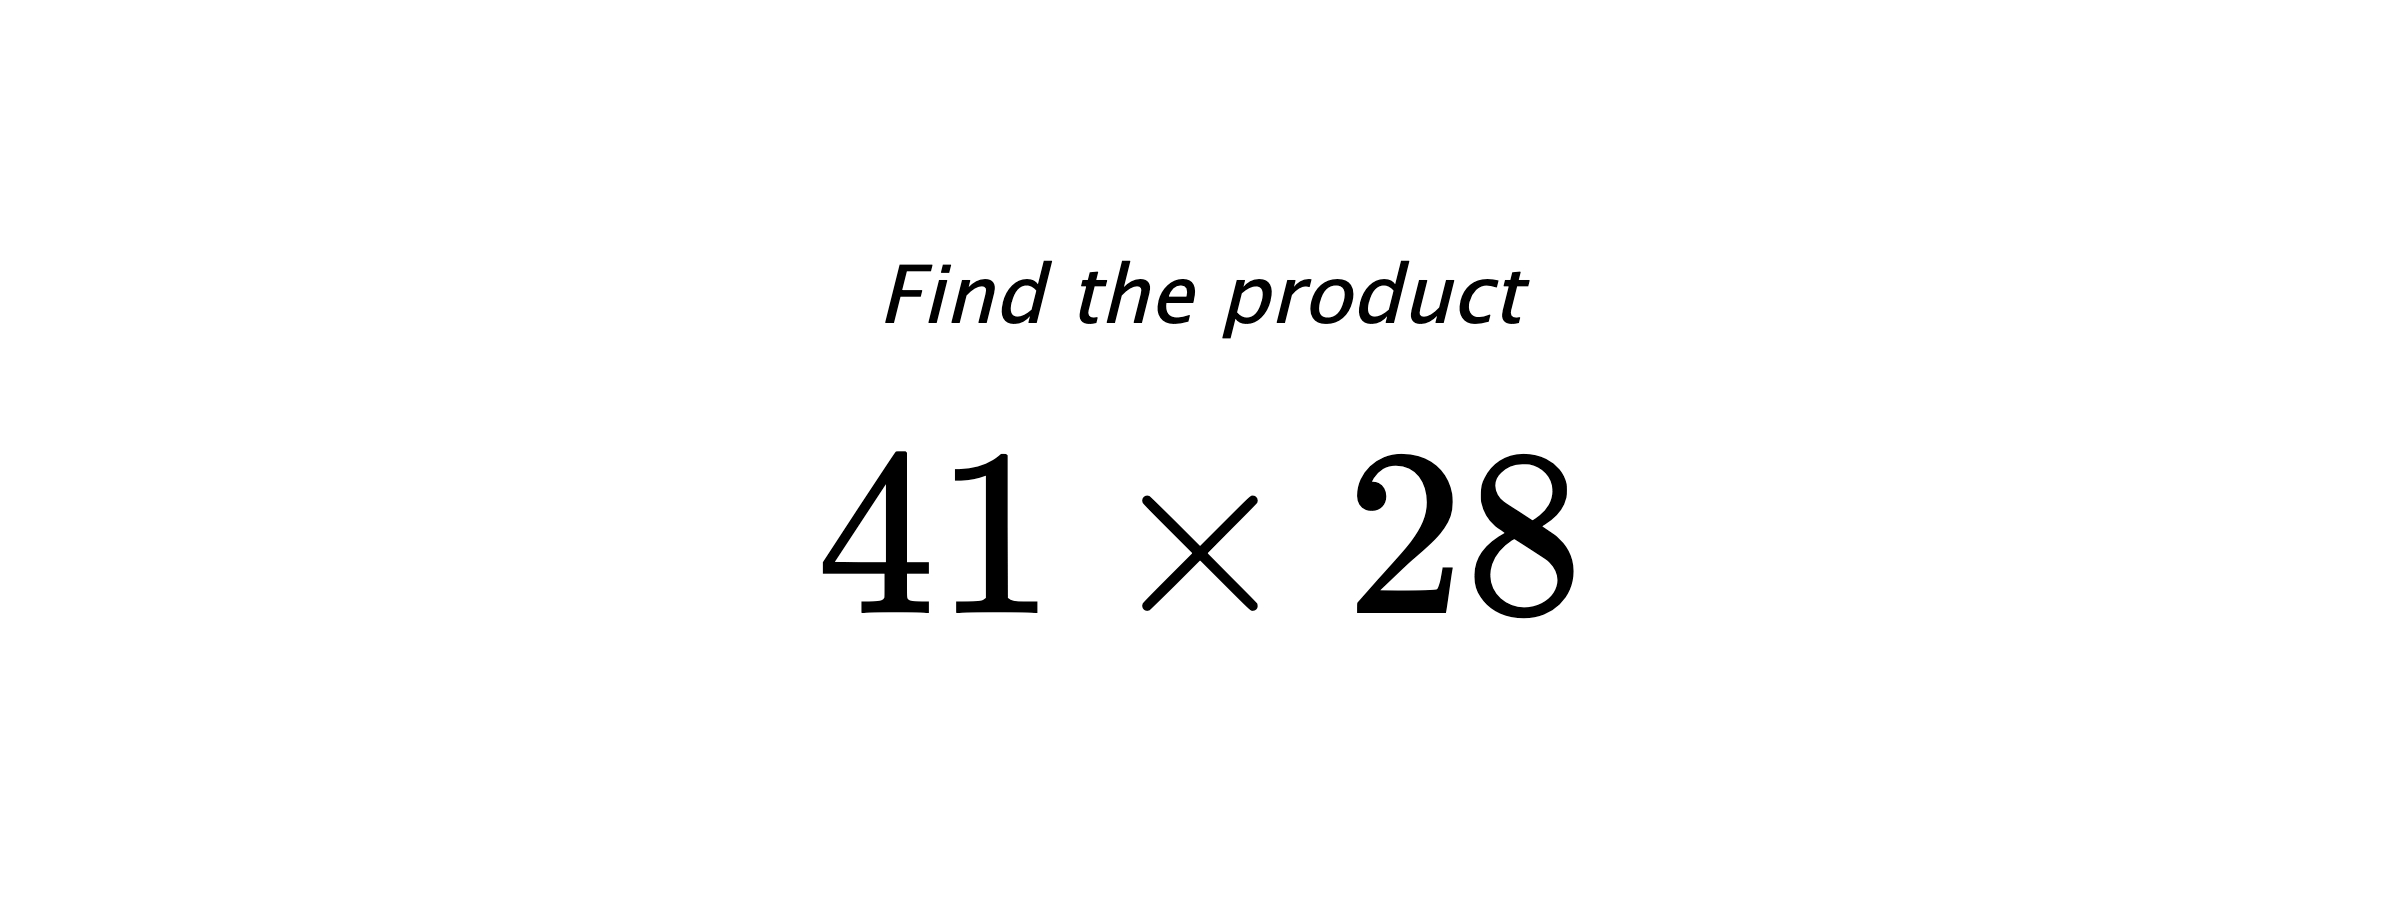 Find the product $ 41 \times 28 $